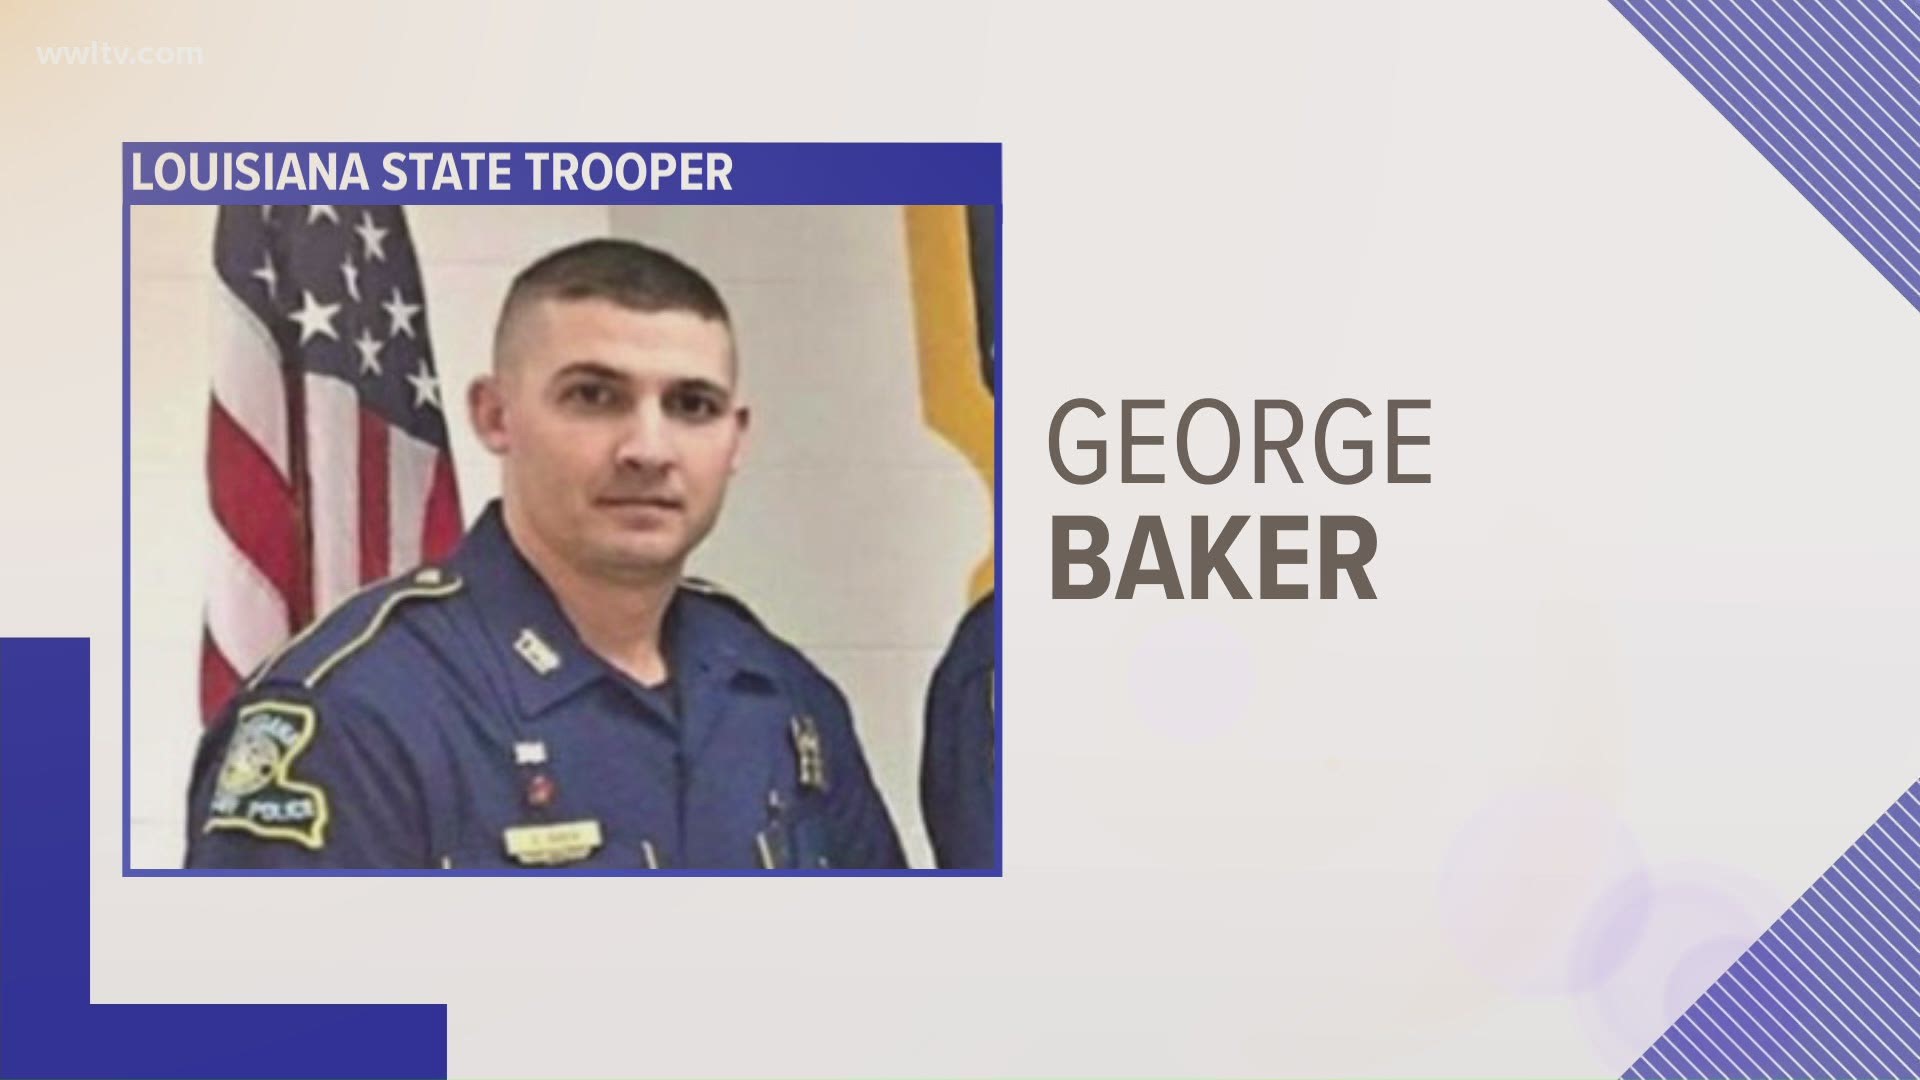 Trooper George Baker, who was critically injured after being struck by a police car as part of a chase on Wednesday, has died from his injuries.